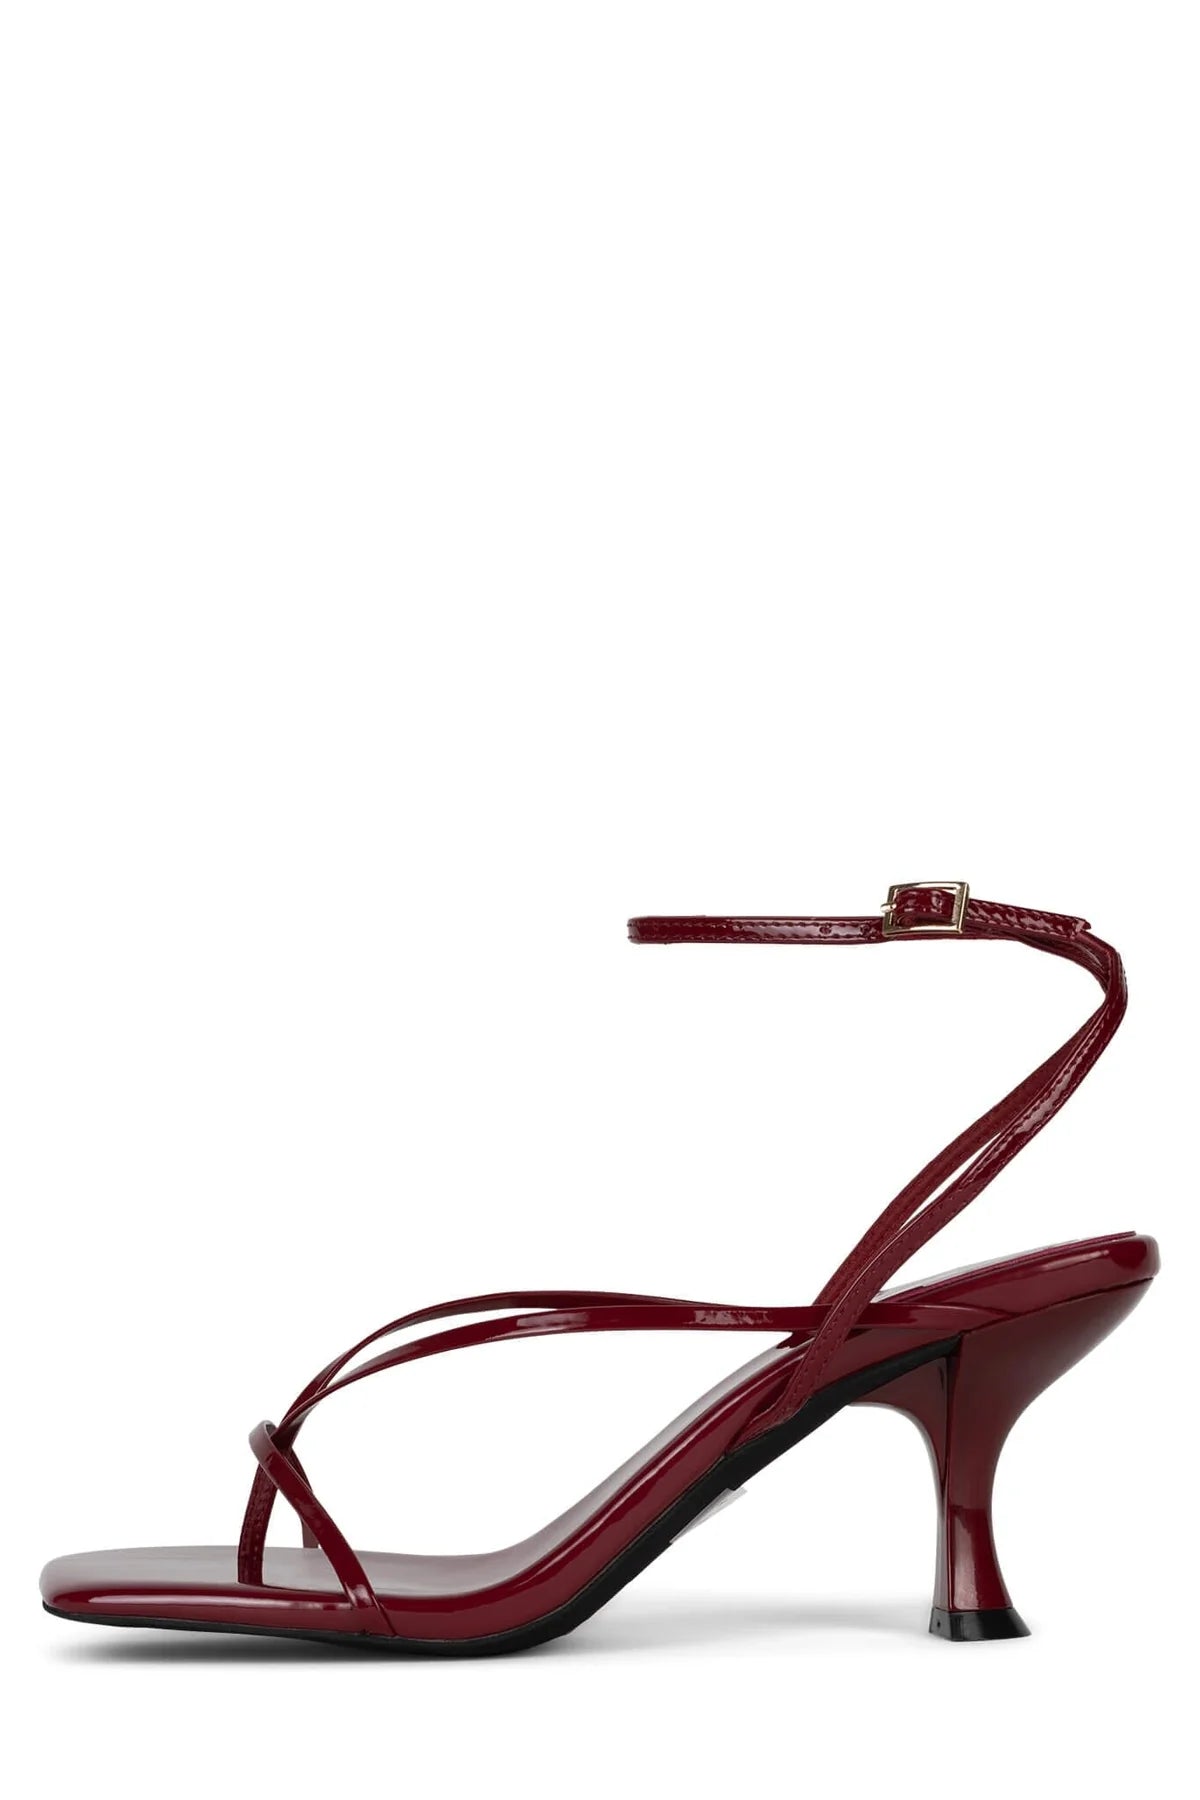 JEFFREY CAMPBELL FLUXX - MH STRAPPY CHERRY RED PATENT